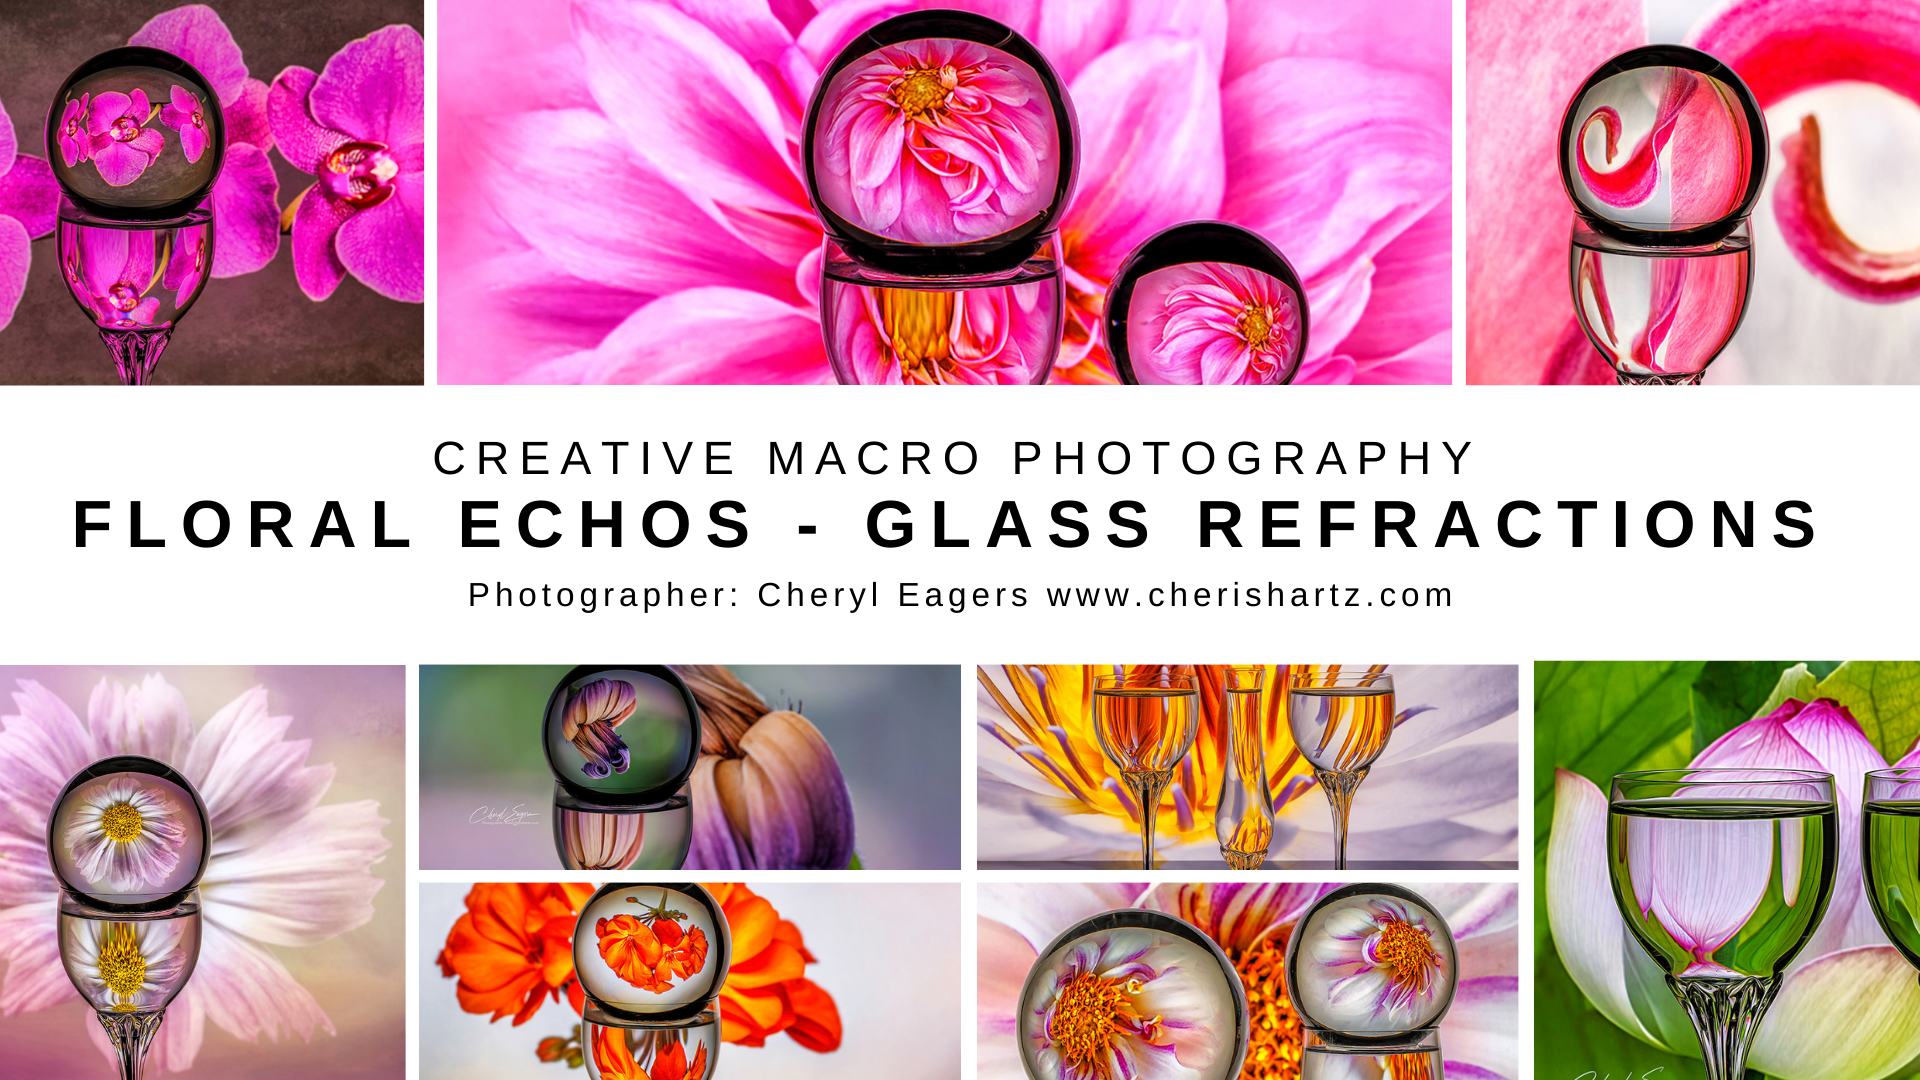 creative photography using glass refractions and your own flower images